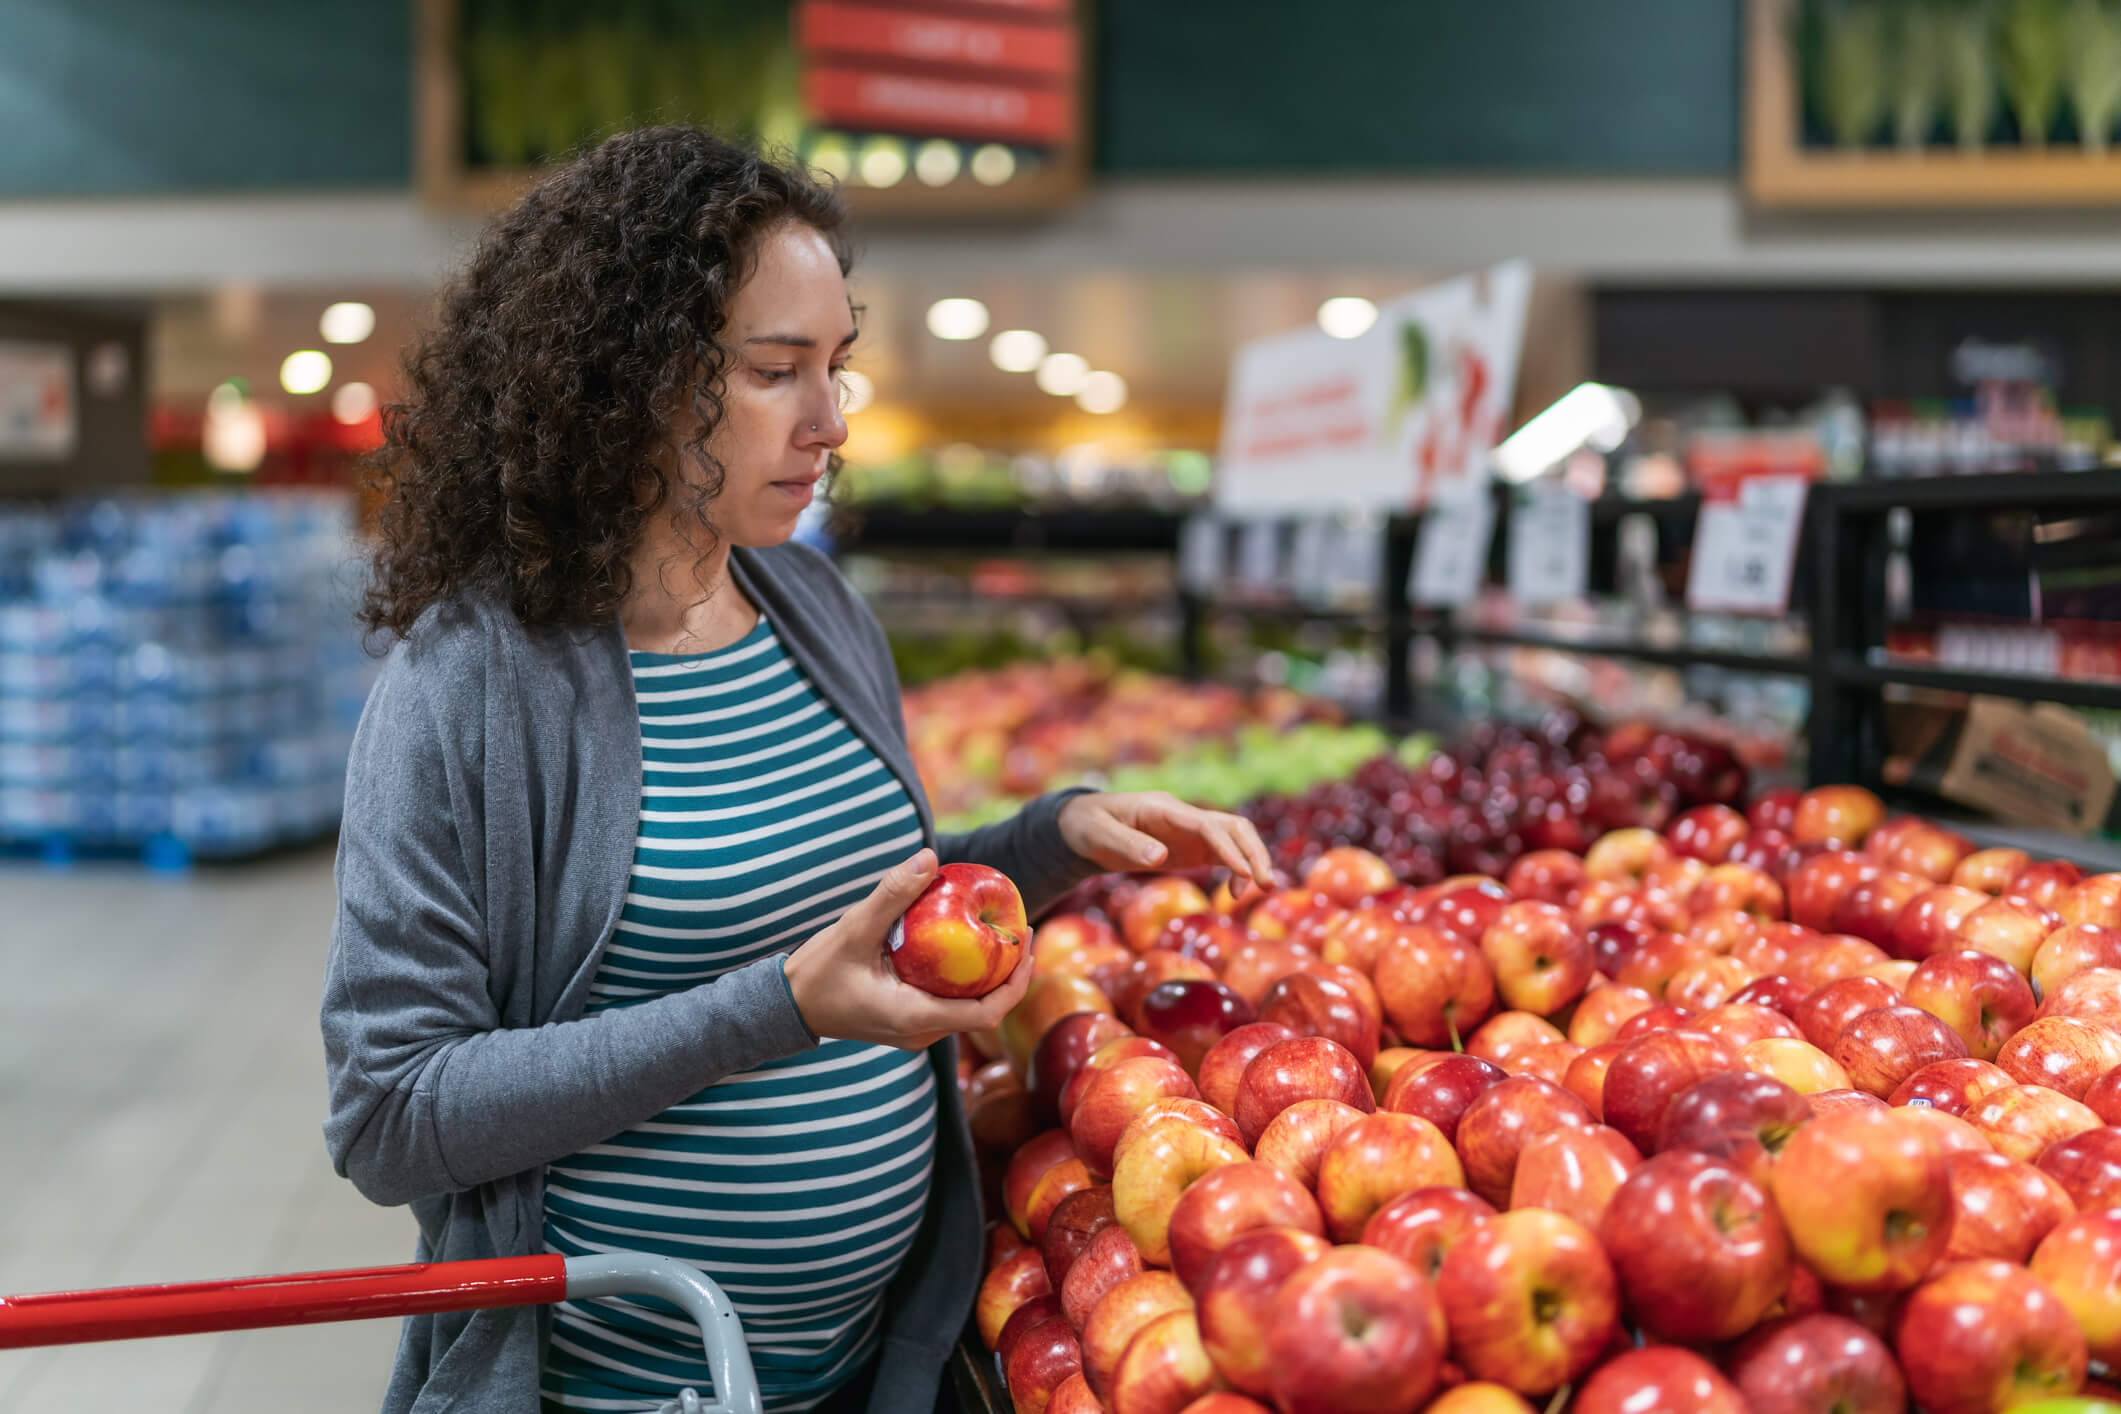 A young mixed race pregnant woman is in the produce section at the grocery store. The healthy woman is buying apples. She is wearing casual maternity clothing.